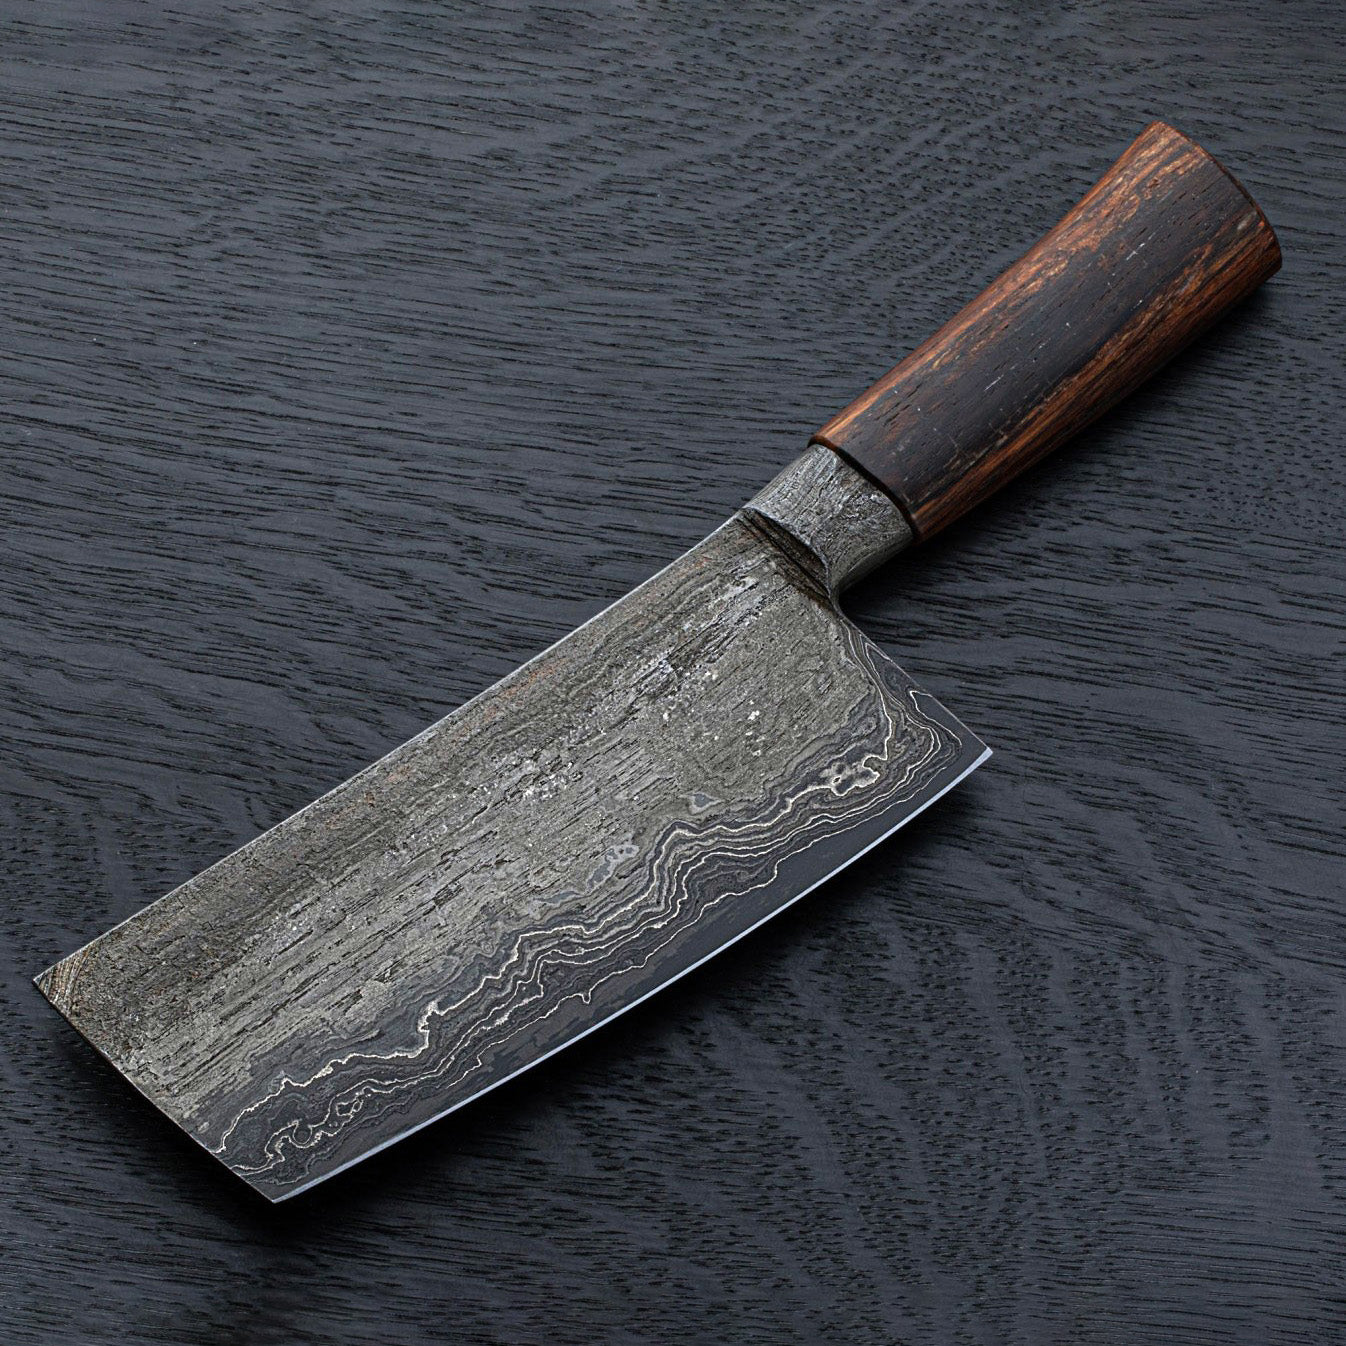 IronSides Cleaver 175mm